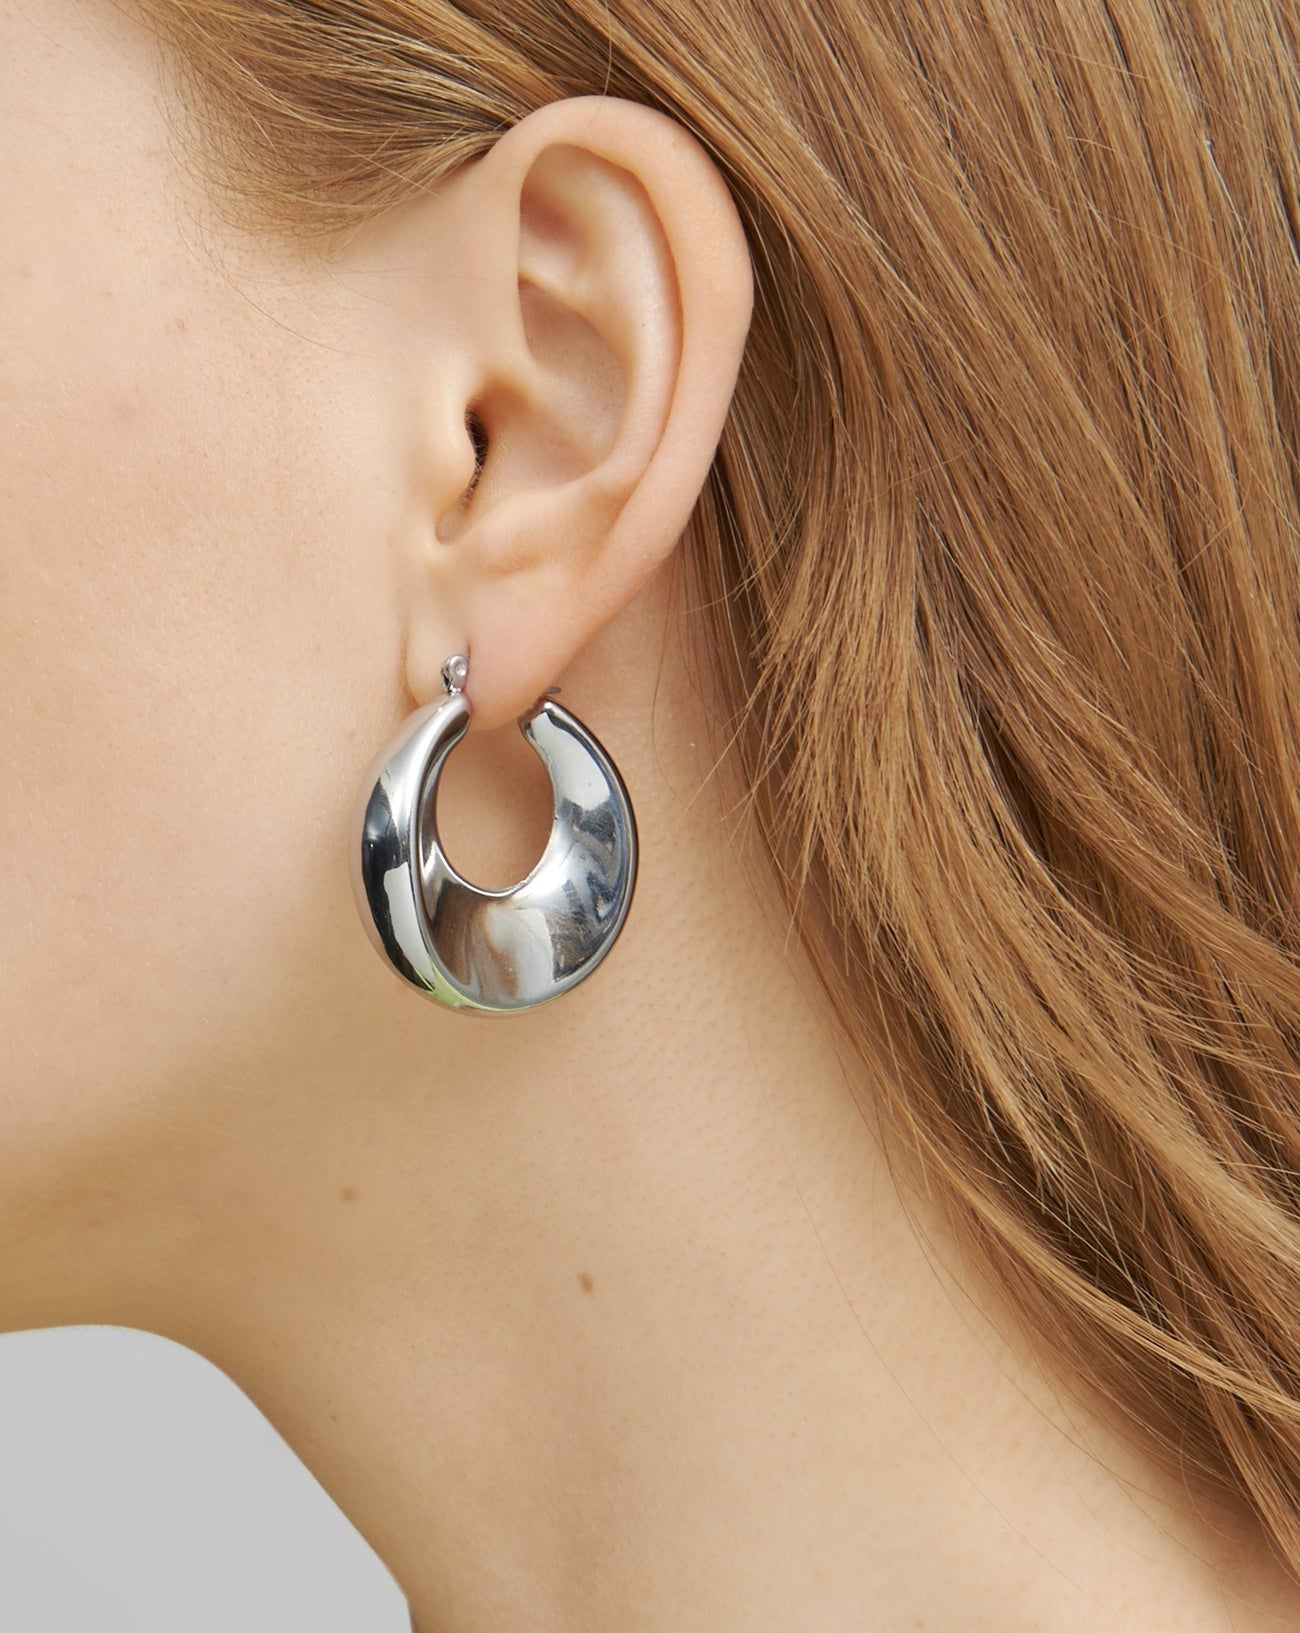 Close-up of a person with light brown hair wearing large, shiny, silver hoop earrings. The photo focuses on the ear and part of the person's hair and cheek, showcasing the distinctive design of the lightweight Moon Earrings Silver by For Art's Sake® against a plain background.